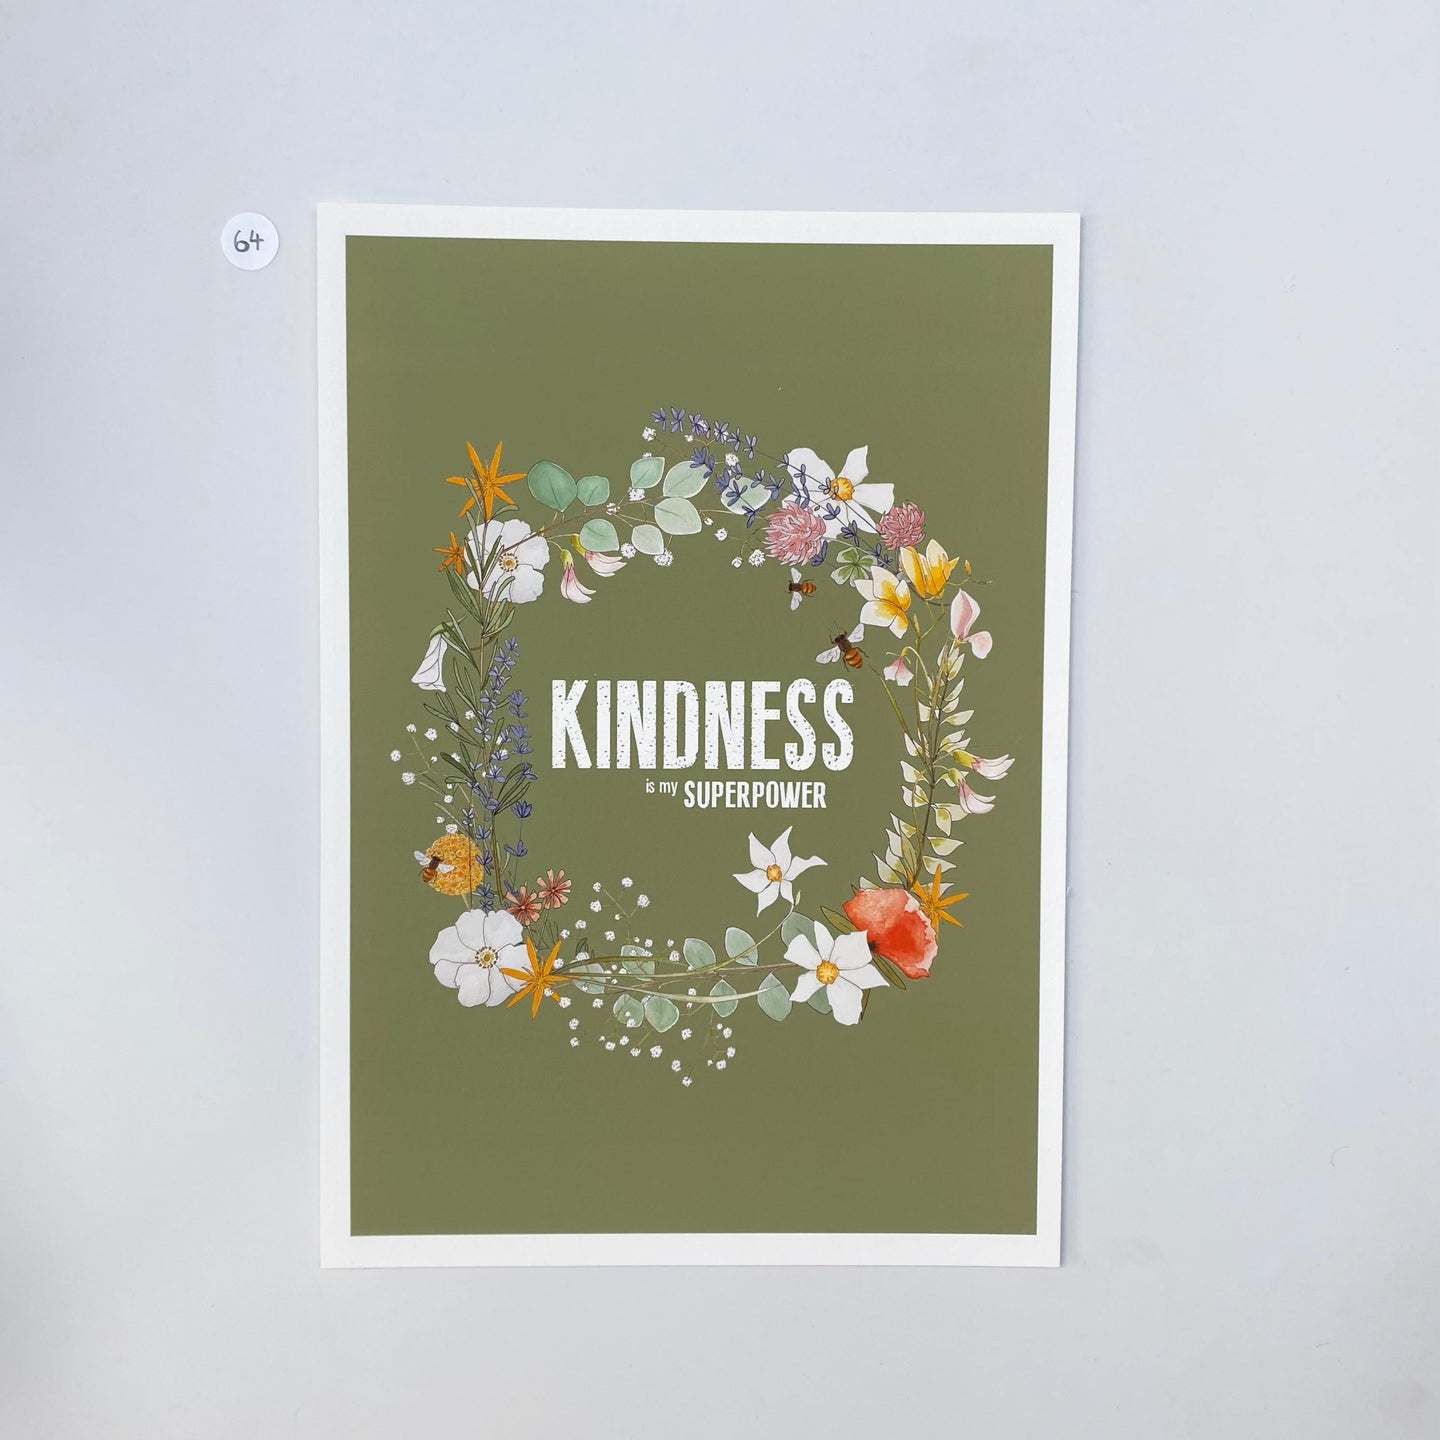 Outlet 64: Kindness is my Superpower - A4